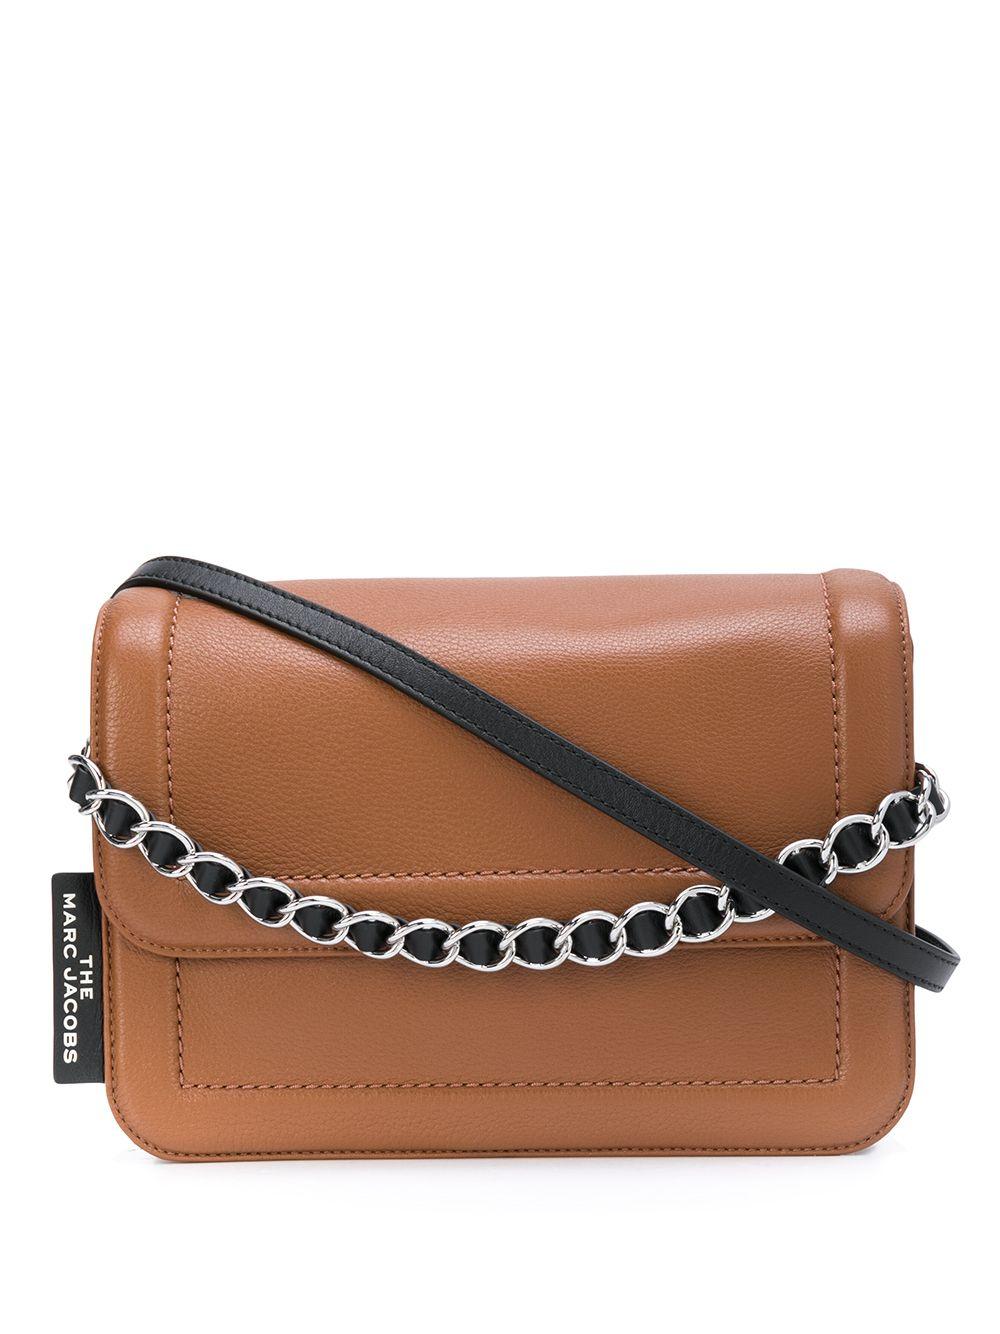 Marc Jacobs Leather The Cushion Bag in Brown - Lyst